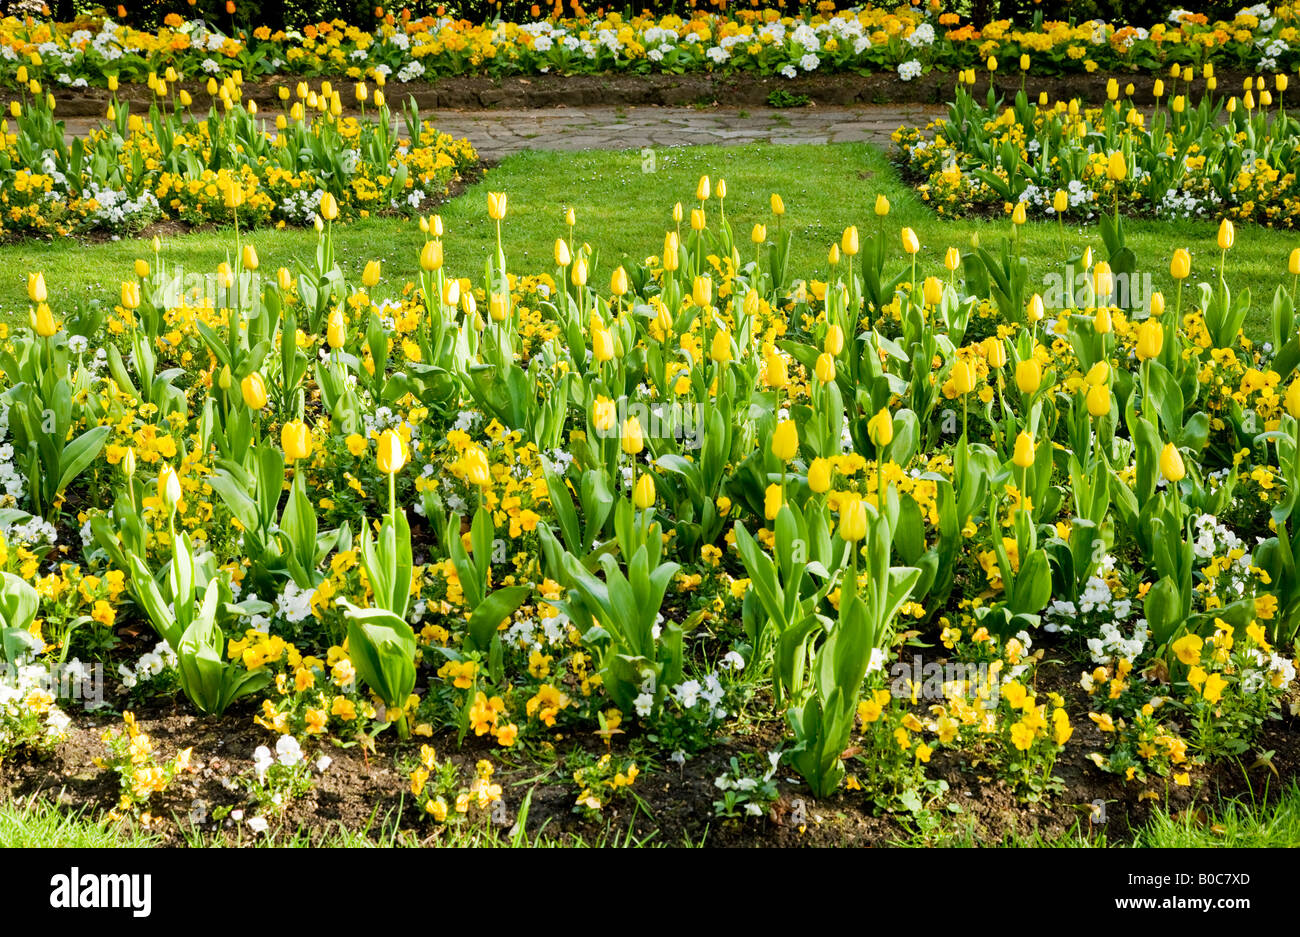 Formal spring flower beds of yellow tulips and pansies in the Town Gardens, Swindon, Wiltshire, England, UK Stock Photo